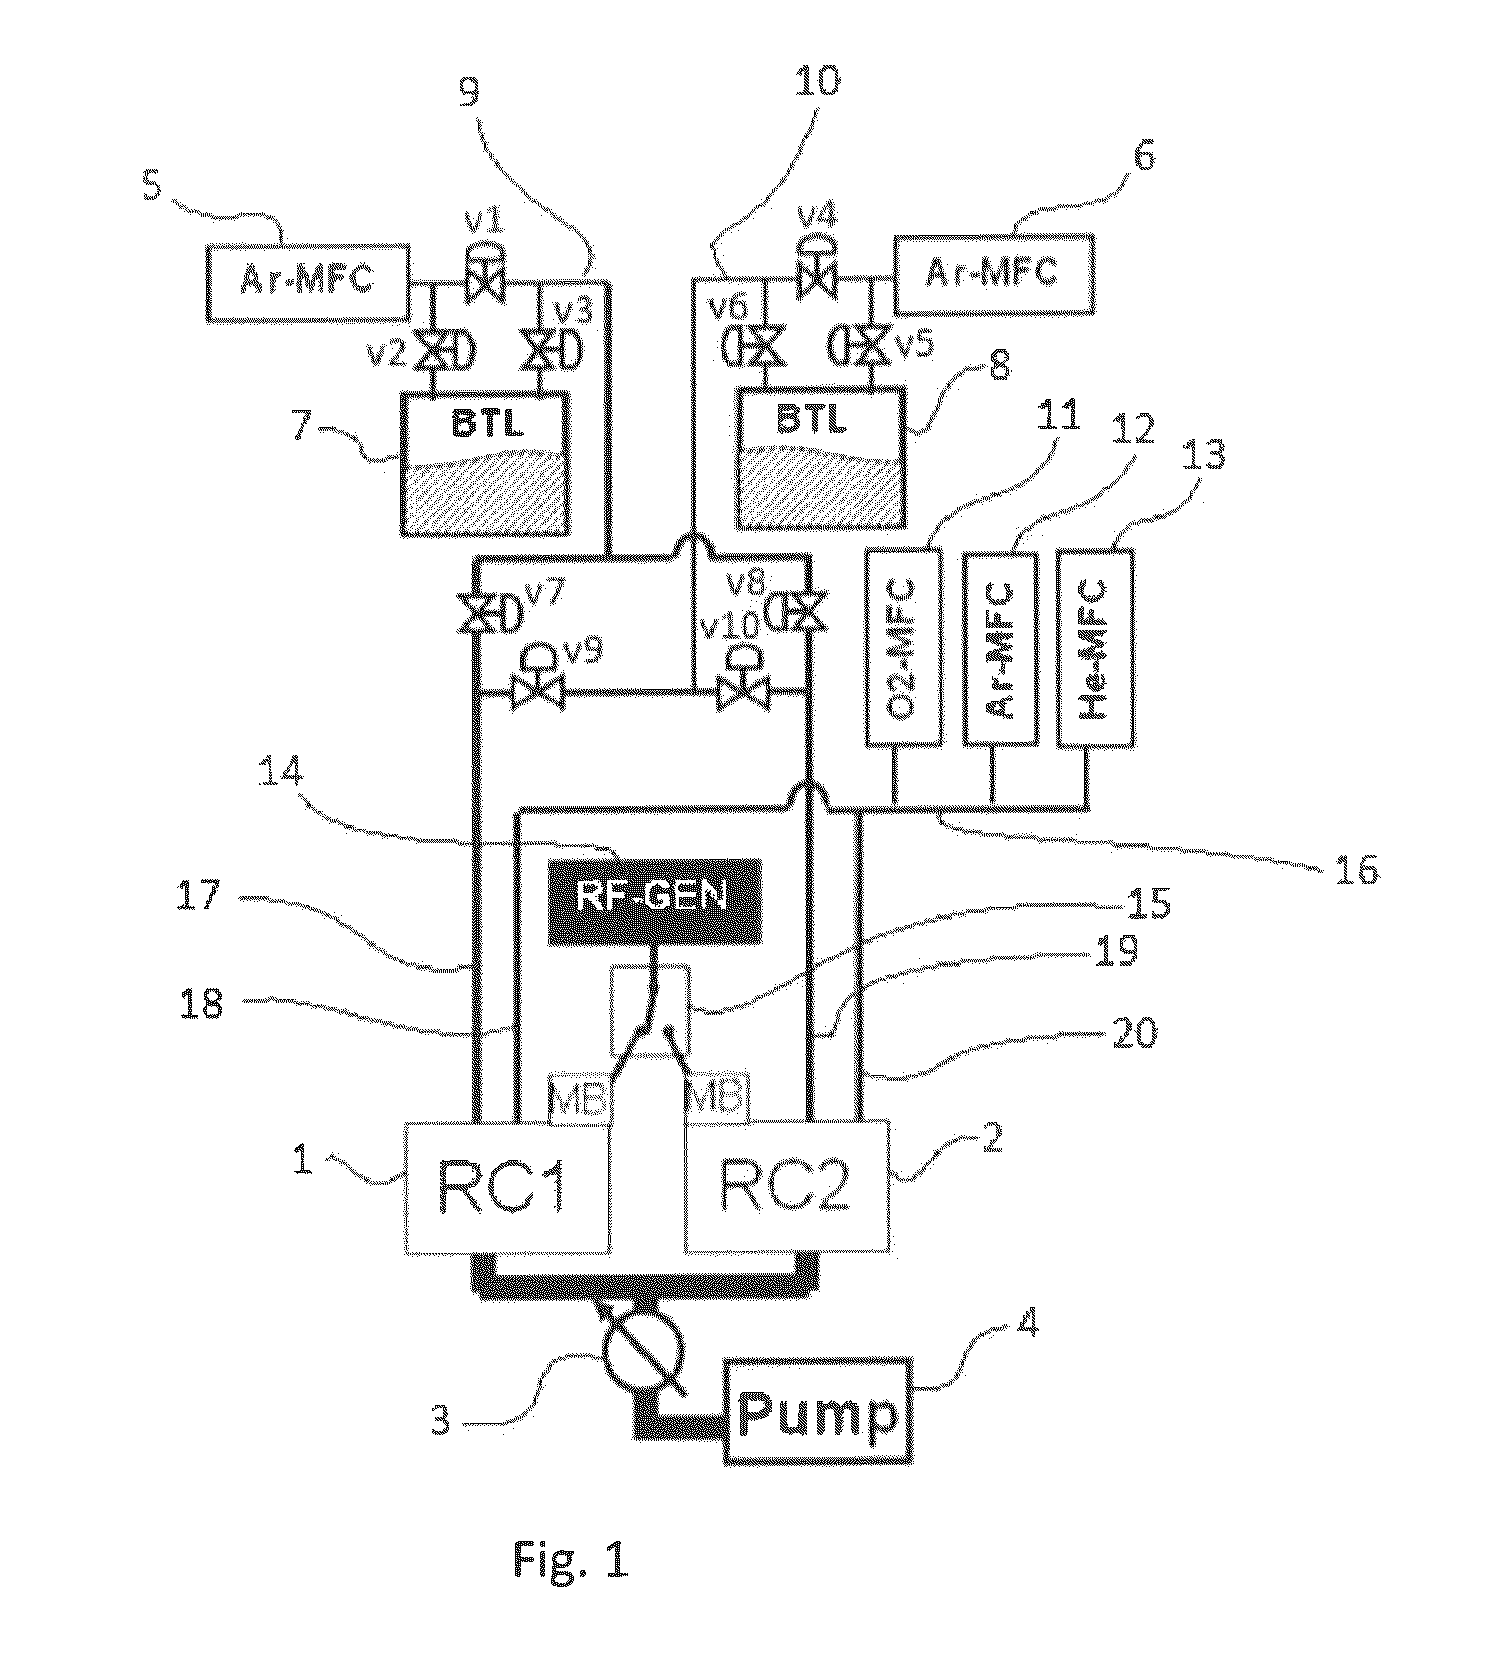 Method for performing uniform processing in gas system-sharing multiple reaction chambers